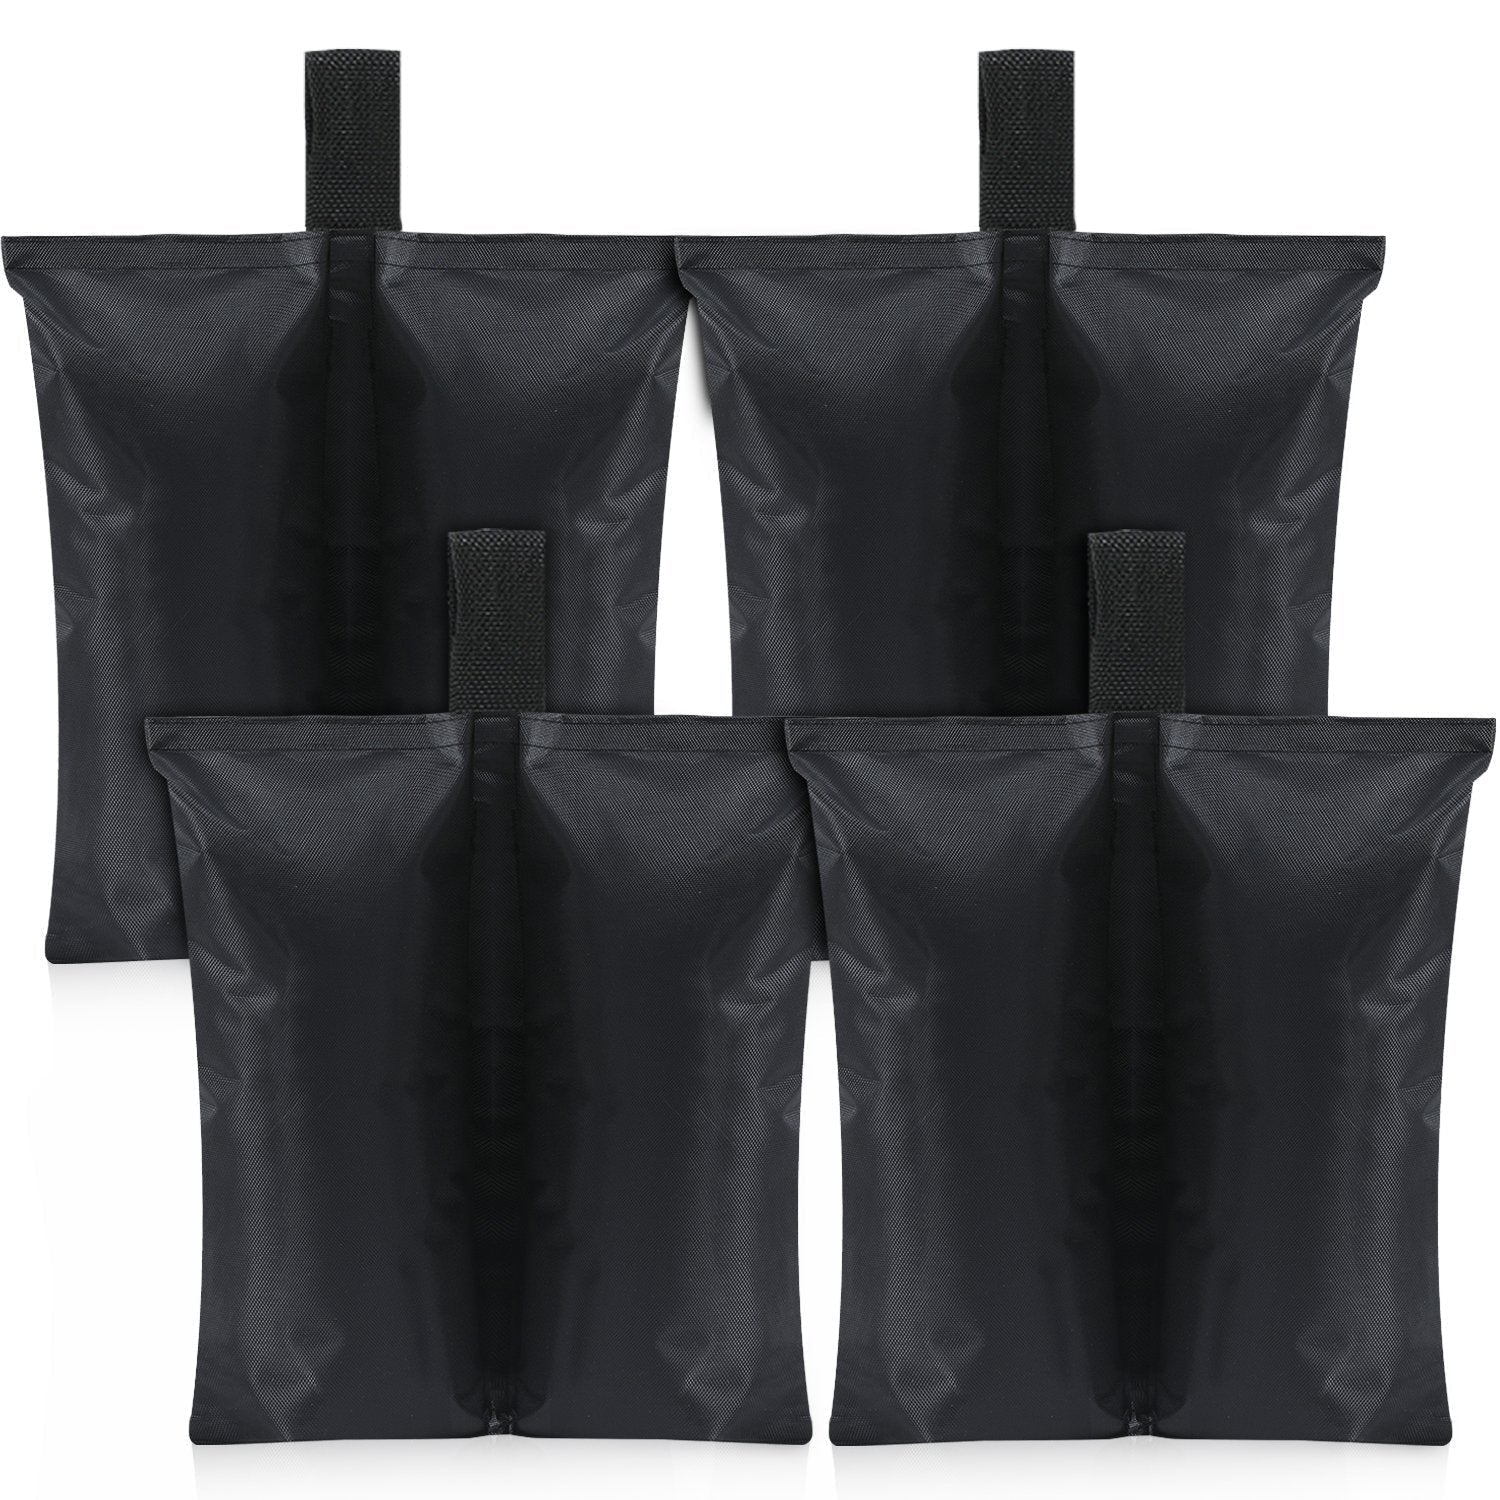 ABCCANOPY Industrial Grade Weights Bag Leg Weights for Pop Up Canopy Tent 4pcs-pack